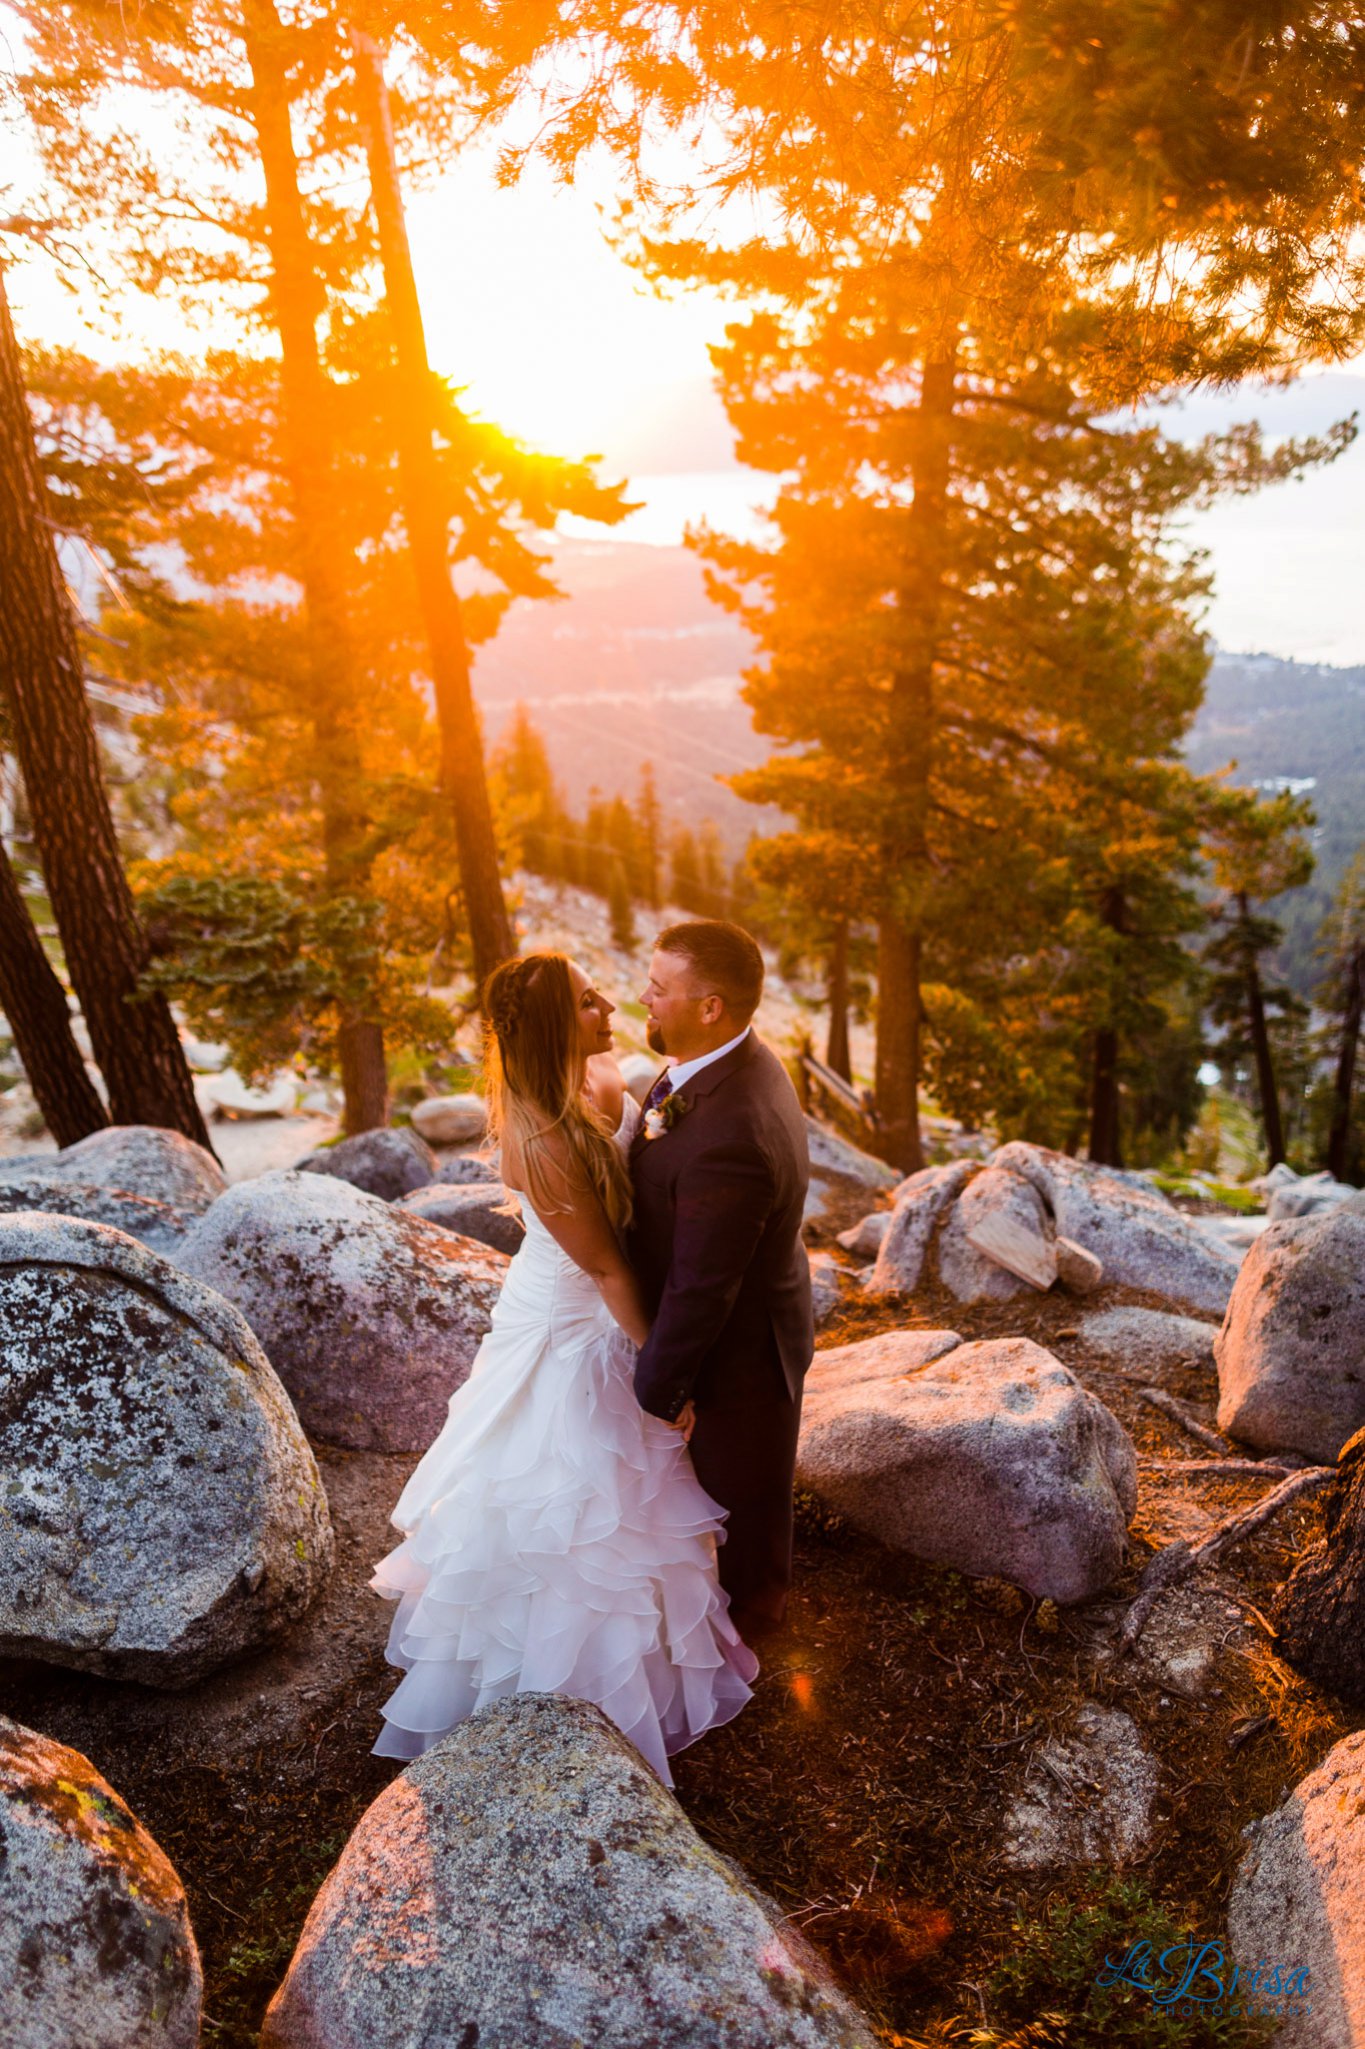 Jessica & Kyle | Wedding Photography Preview | Lake Tahoe, CA | Chris Hsieh